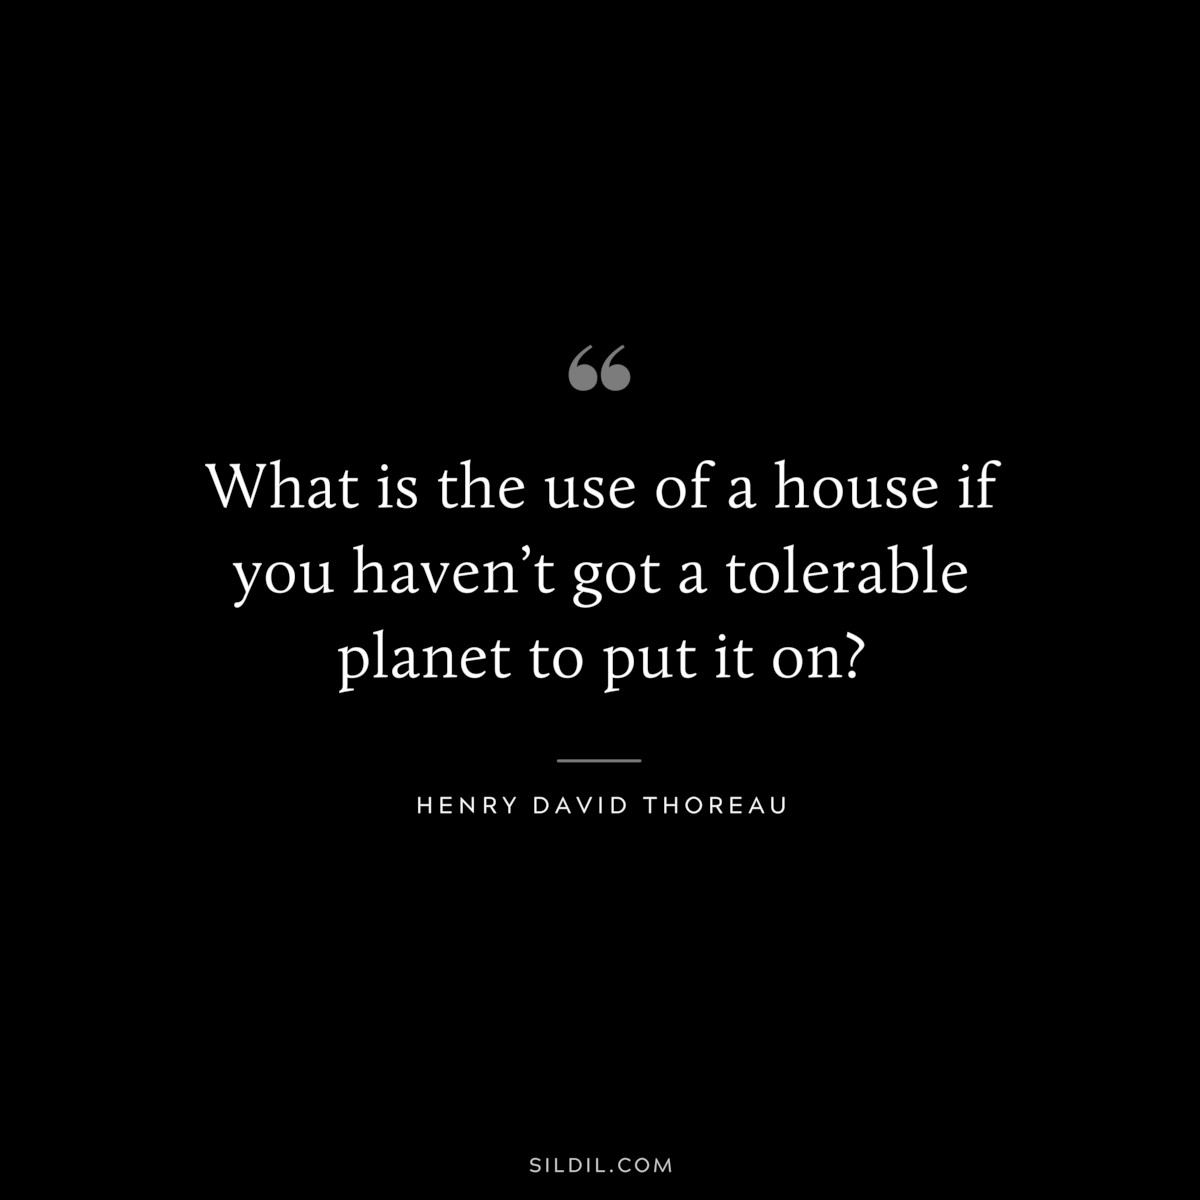 What is the use of a house if you haven’t got a tolerable planet to put it on? — Henry David Thoreau